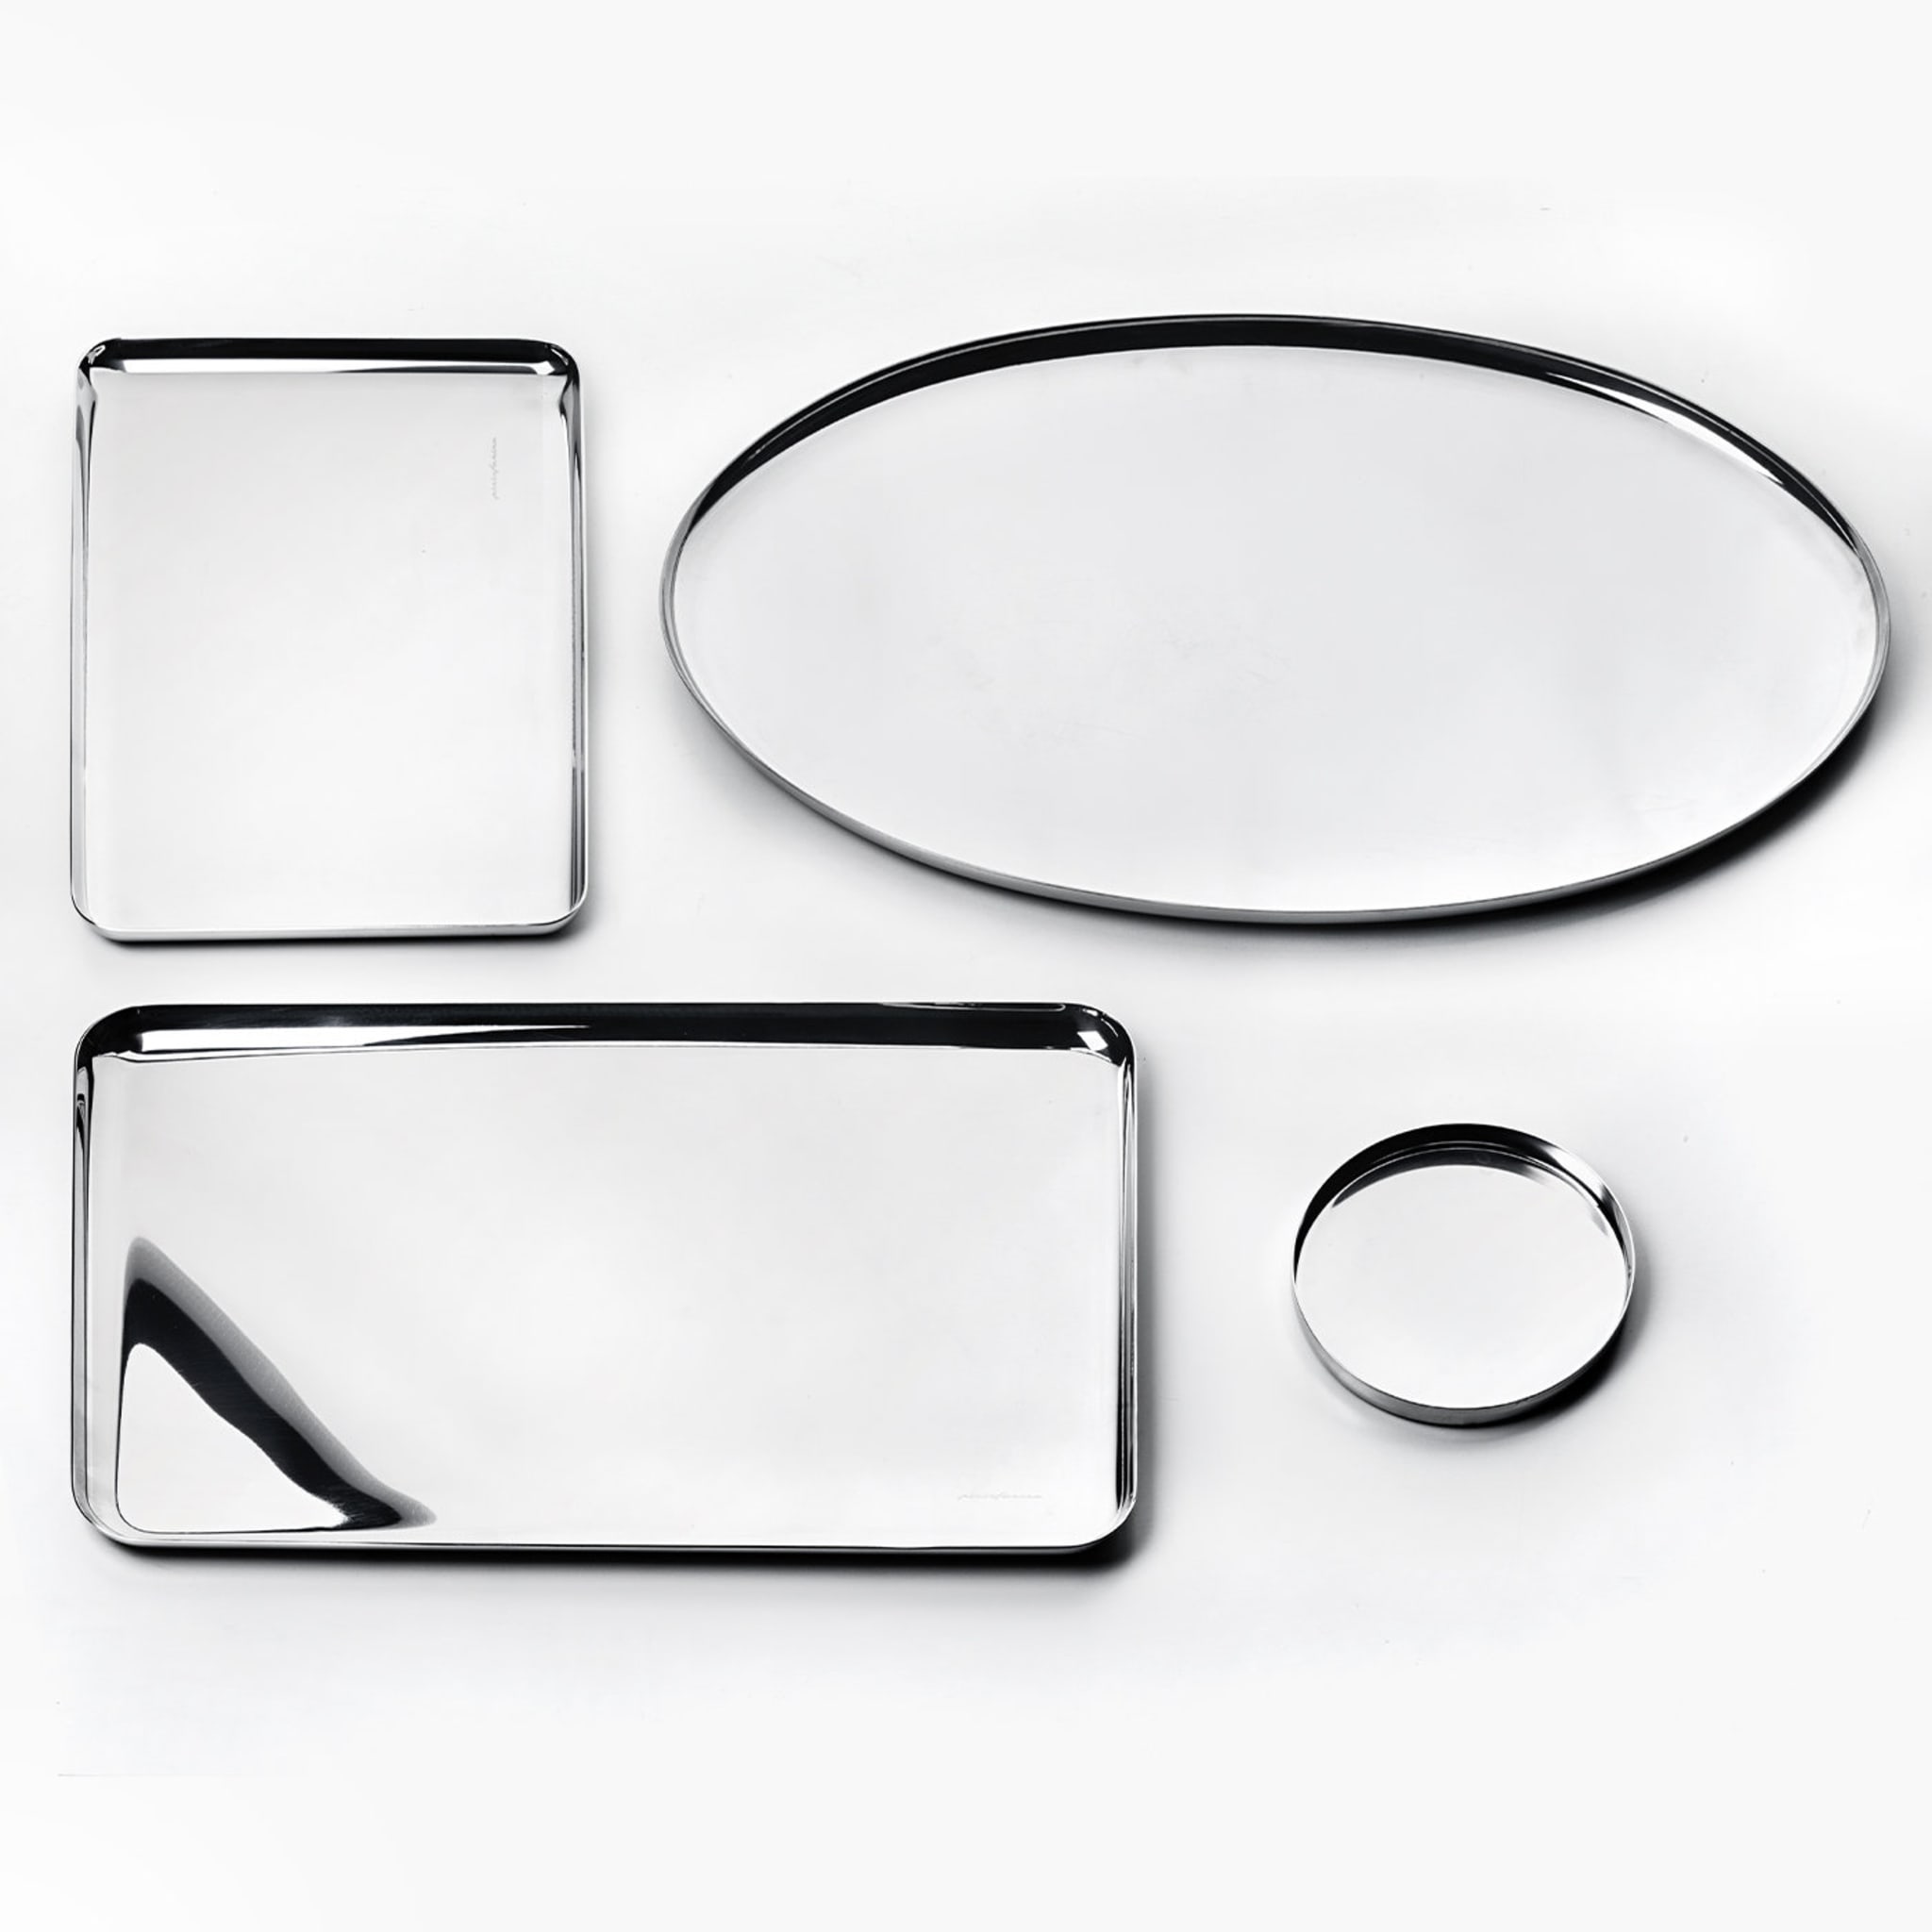 Stile Stainless Steel Oval Tray - Alternative view 1